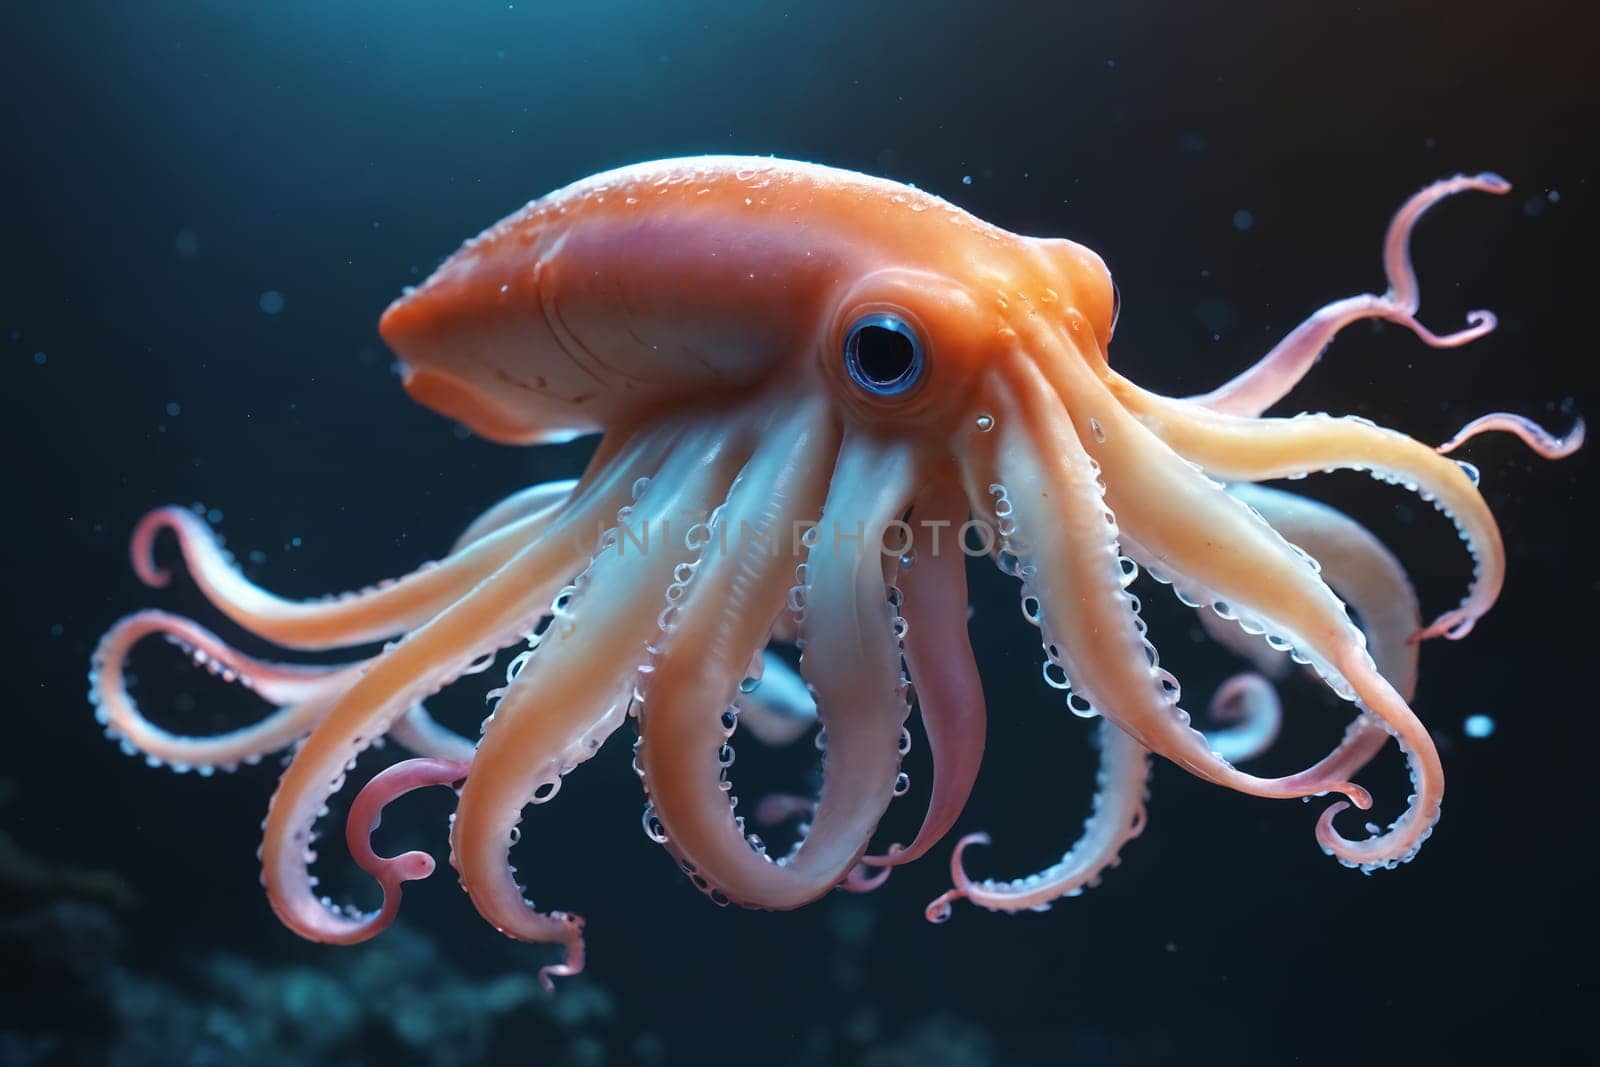 The octopus, with its eight arms and keen eyes, epitomizes the adaptability and mystery of marine life.